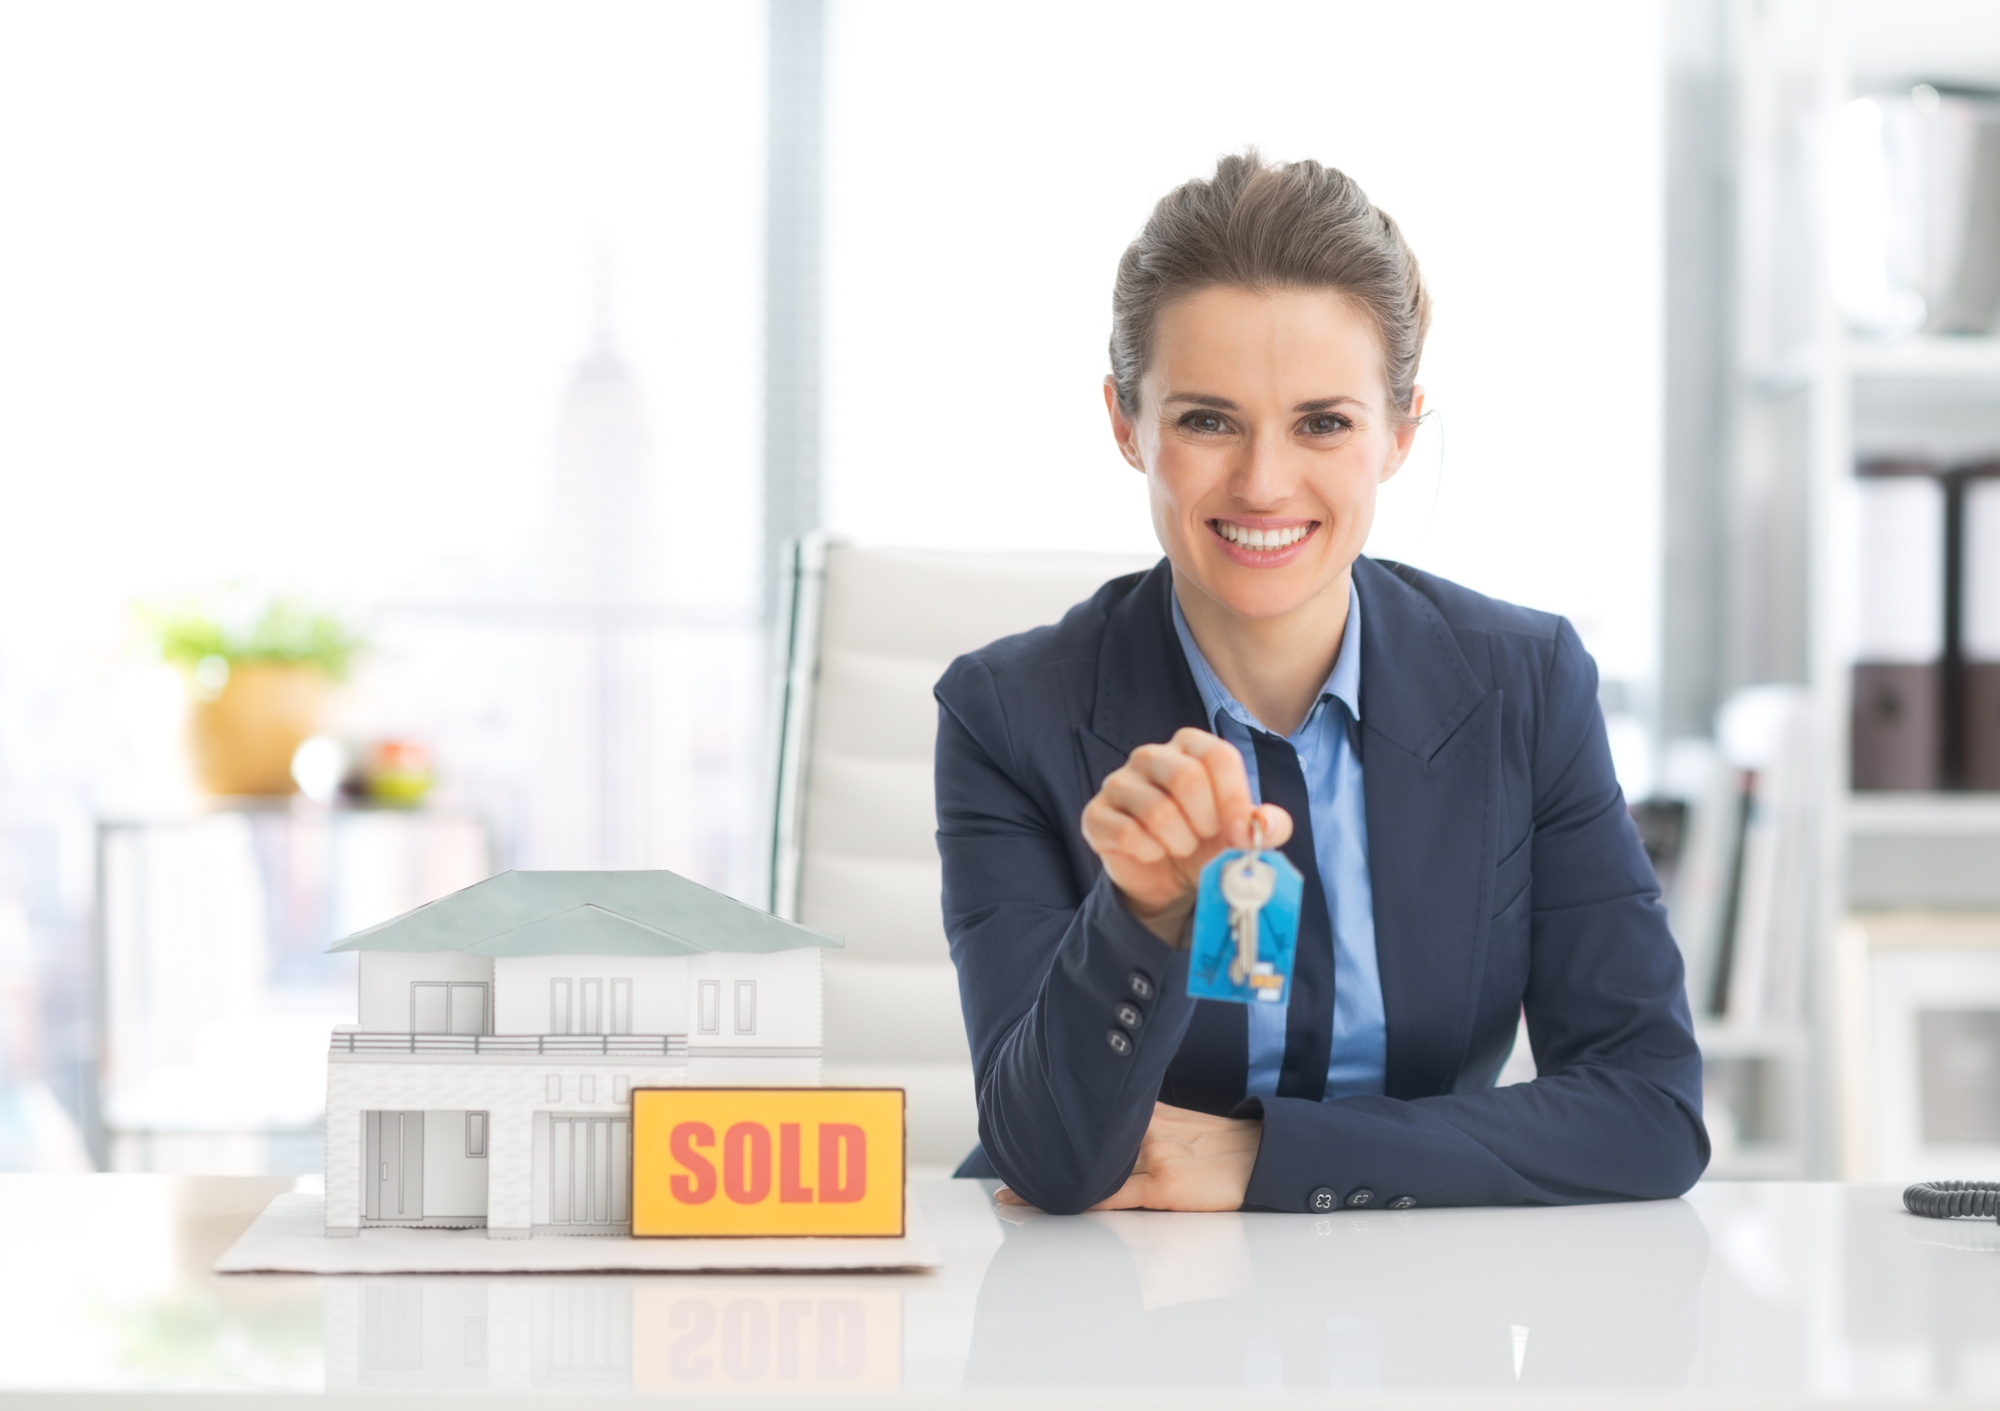 Did you know that not all realtors are created equal these days? Here's how simple it is to choose the best real estate agent in your local area.